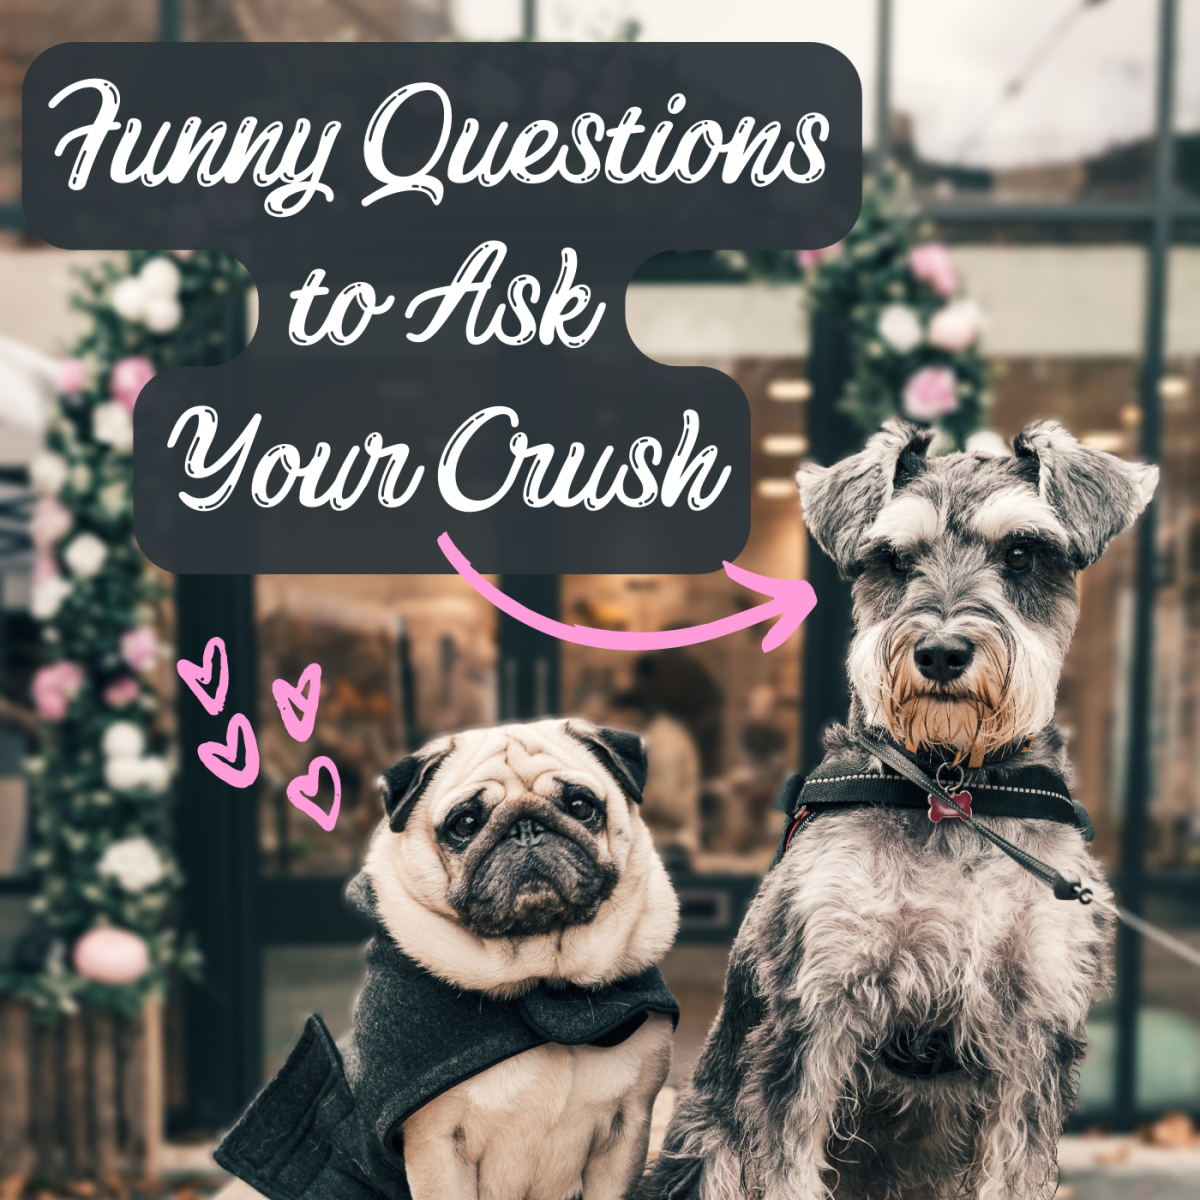 Questions to ask your crush